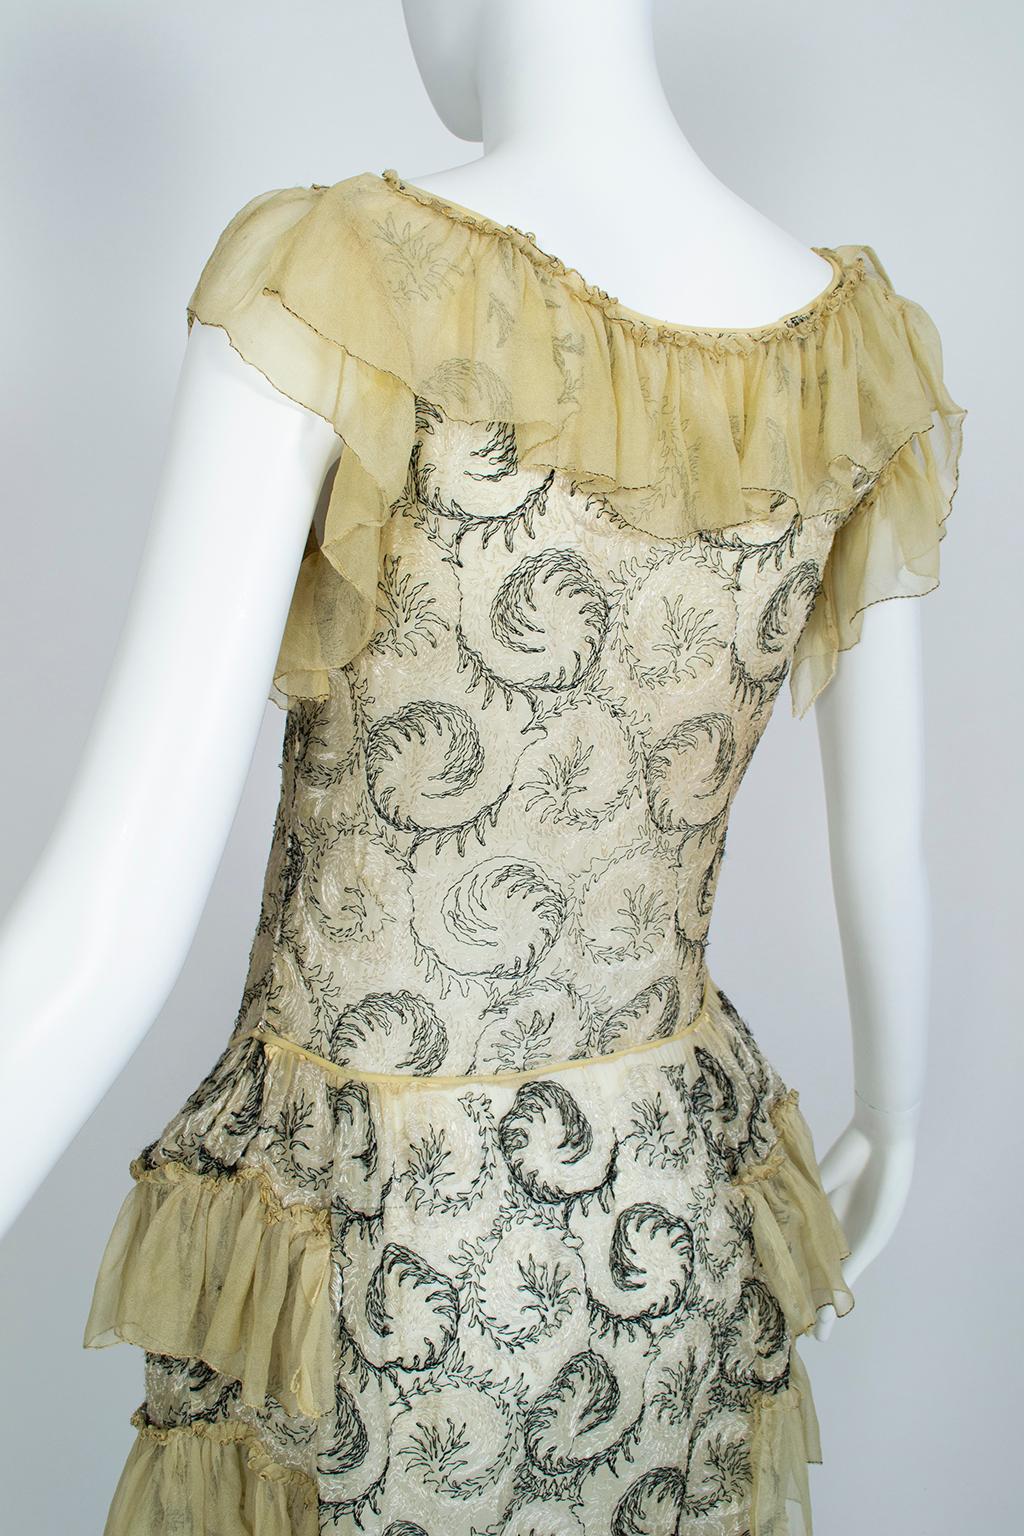 Gray Chartreuse Edwardian Chiffon Robe de Style with Scrolling Embroidery - XS, 1910s For Sale